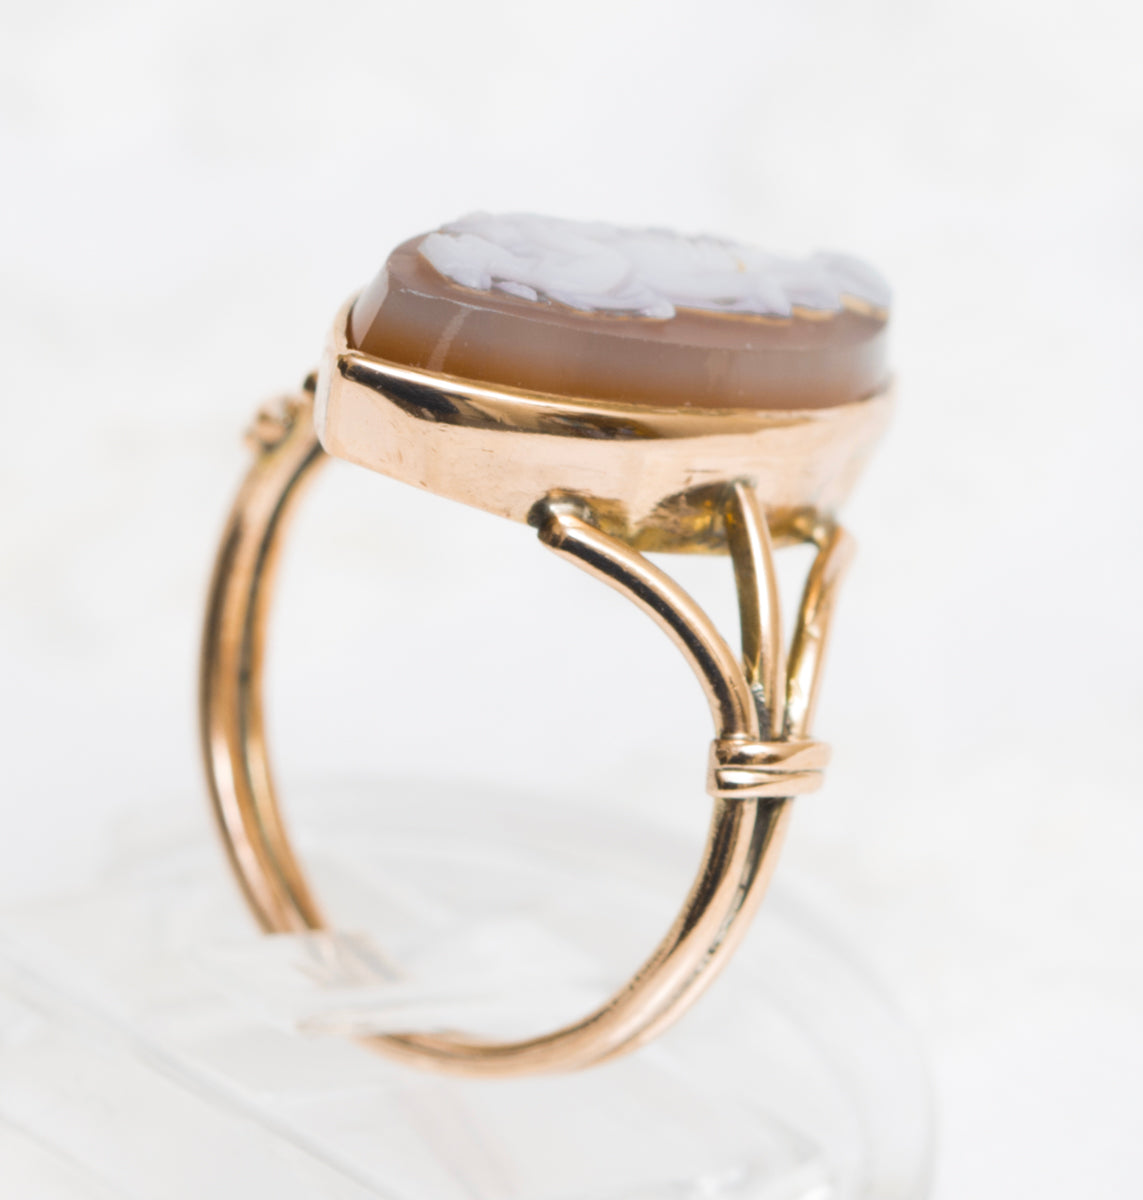 Antique 9ct Rose Gold Ring With Carved Hardstone Cameo Marquise Shape (A1906)